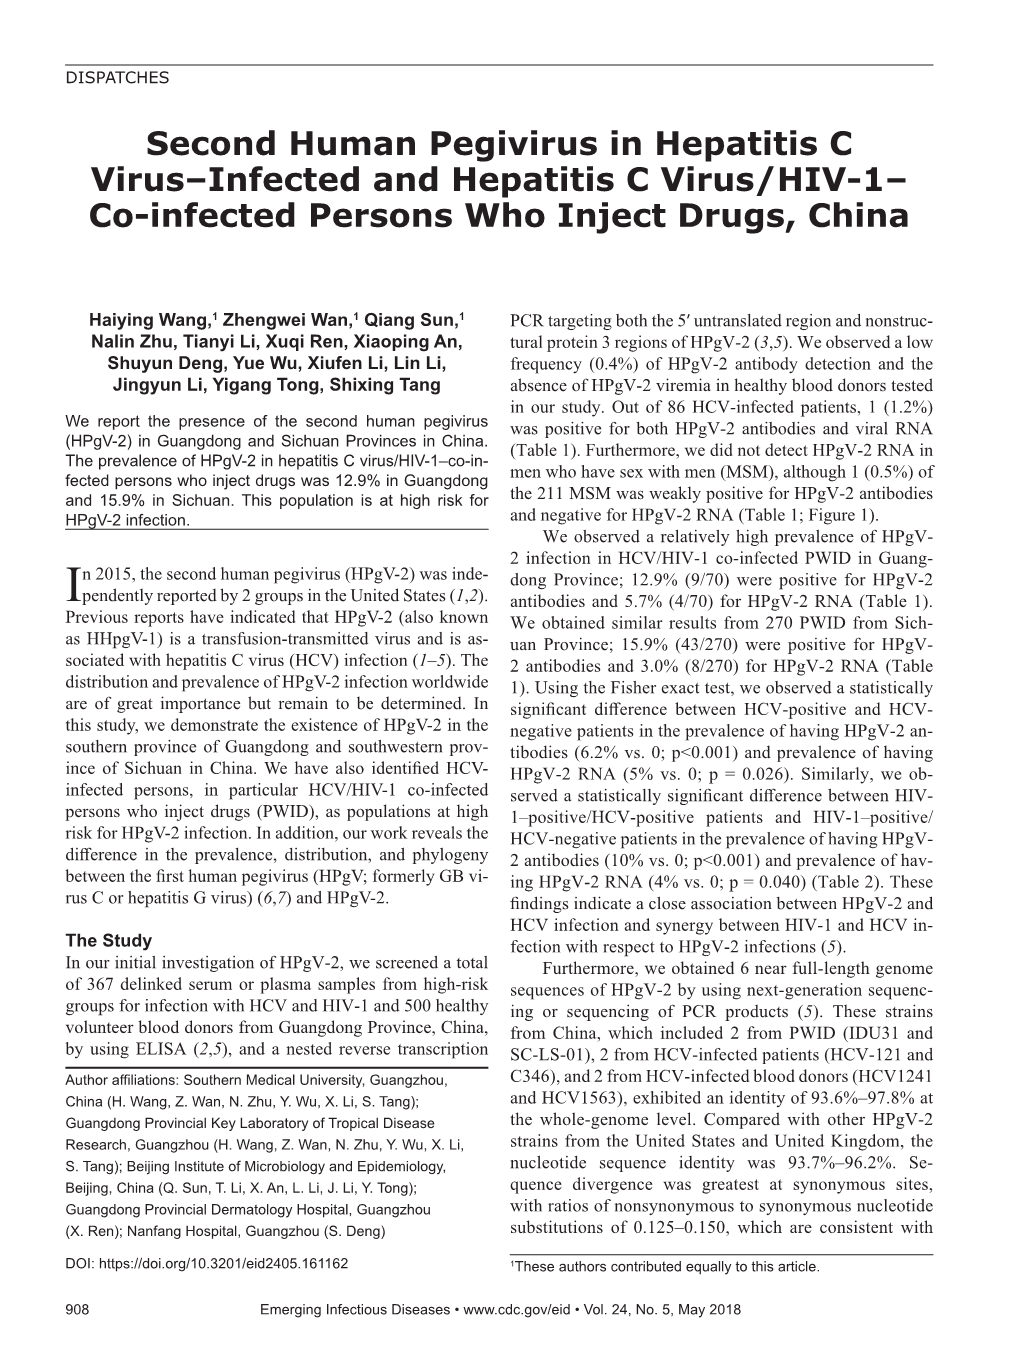 Co-Infected Persons Who Inject Drugs, China